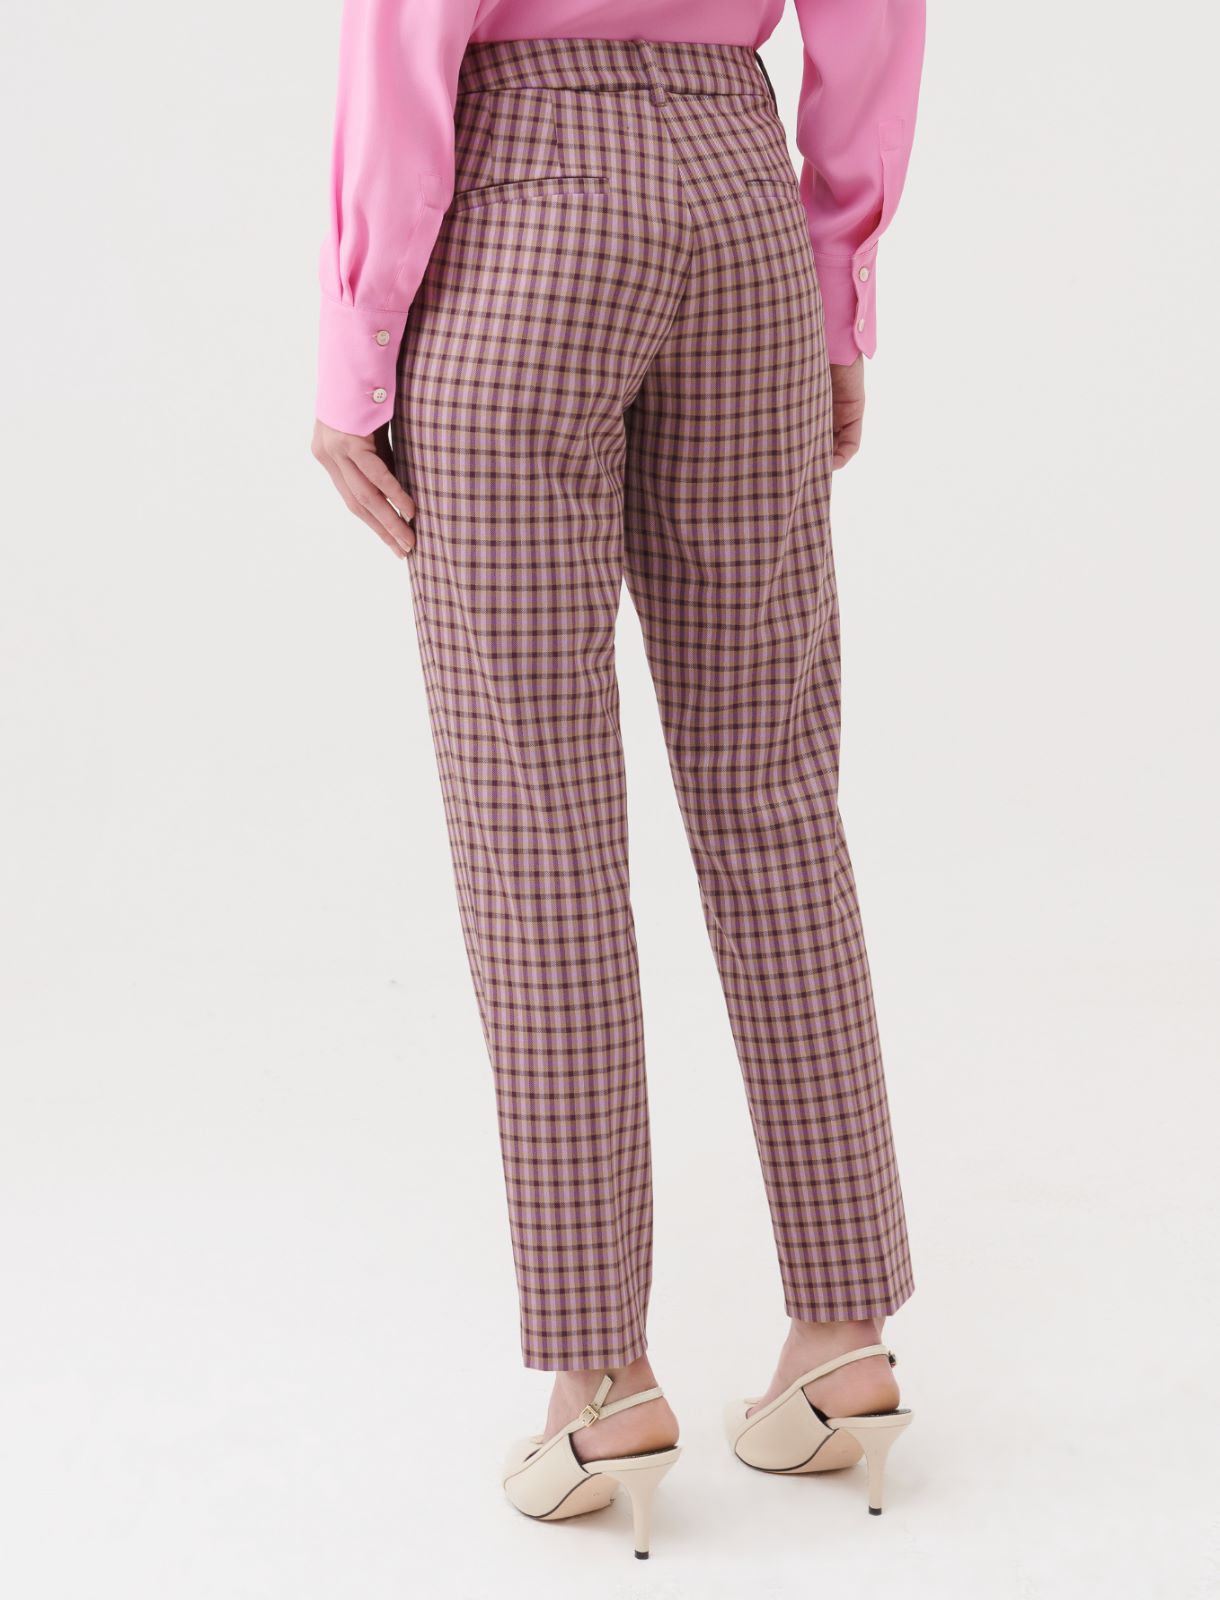 Carrot-fit trousers - Must - Marella - 2